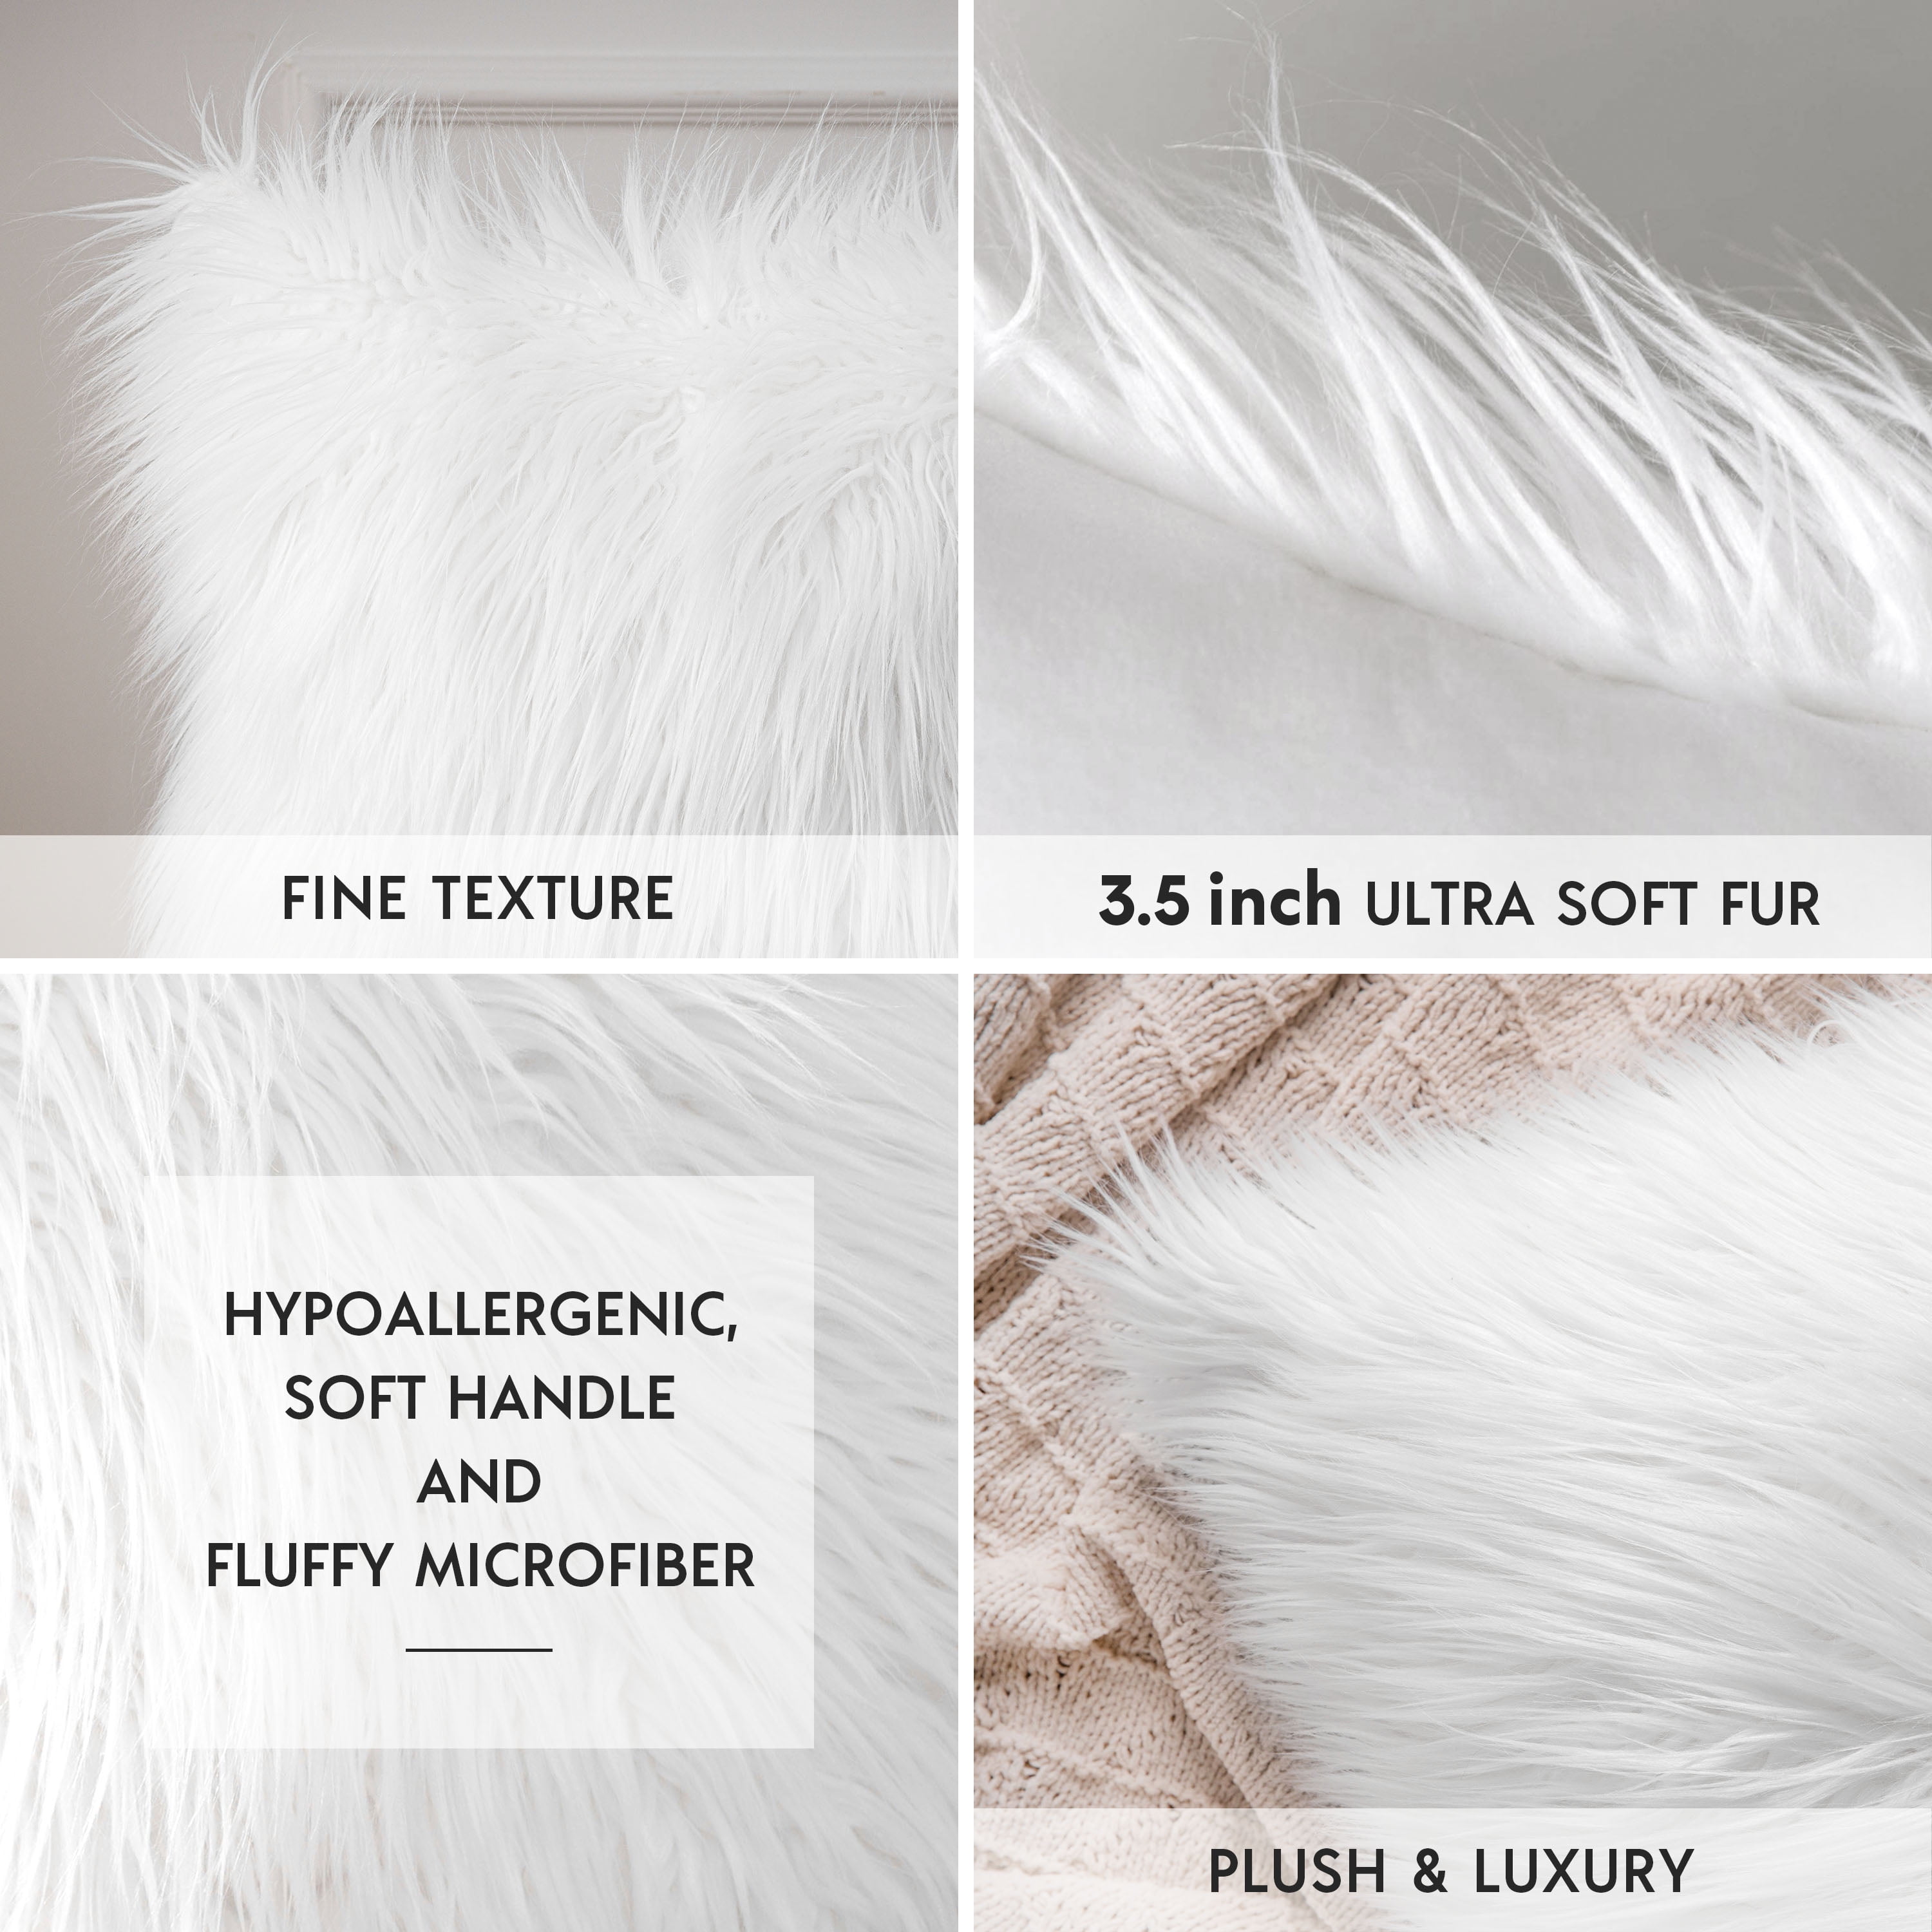 Phantoscope Luxury Mongolian Fluffy Faux Fur Series Square Decorative Throw Pillow Cusion for Couch, 22 inch x 22 inch, Beige, 2 Pack